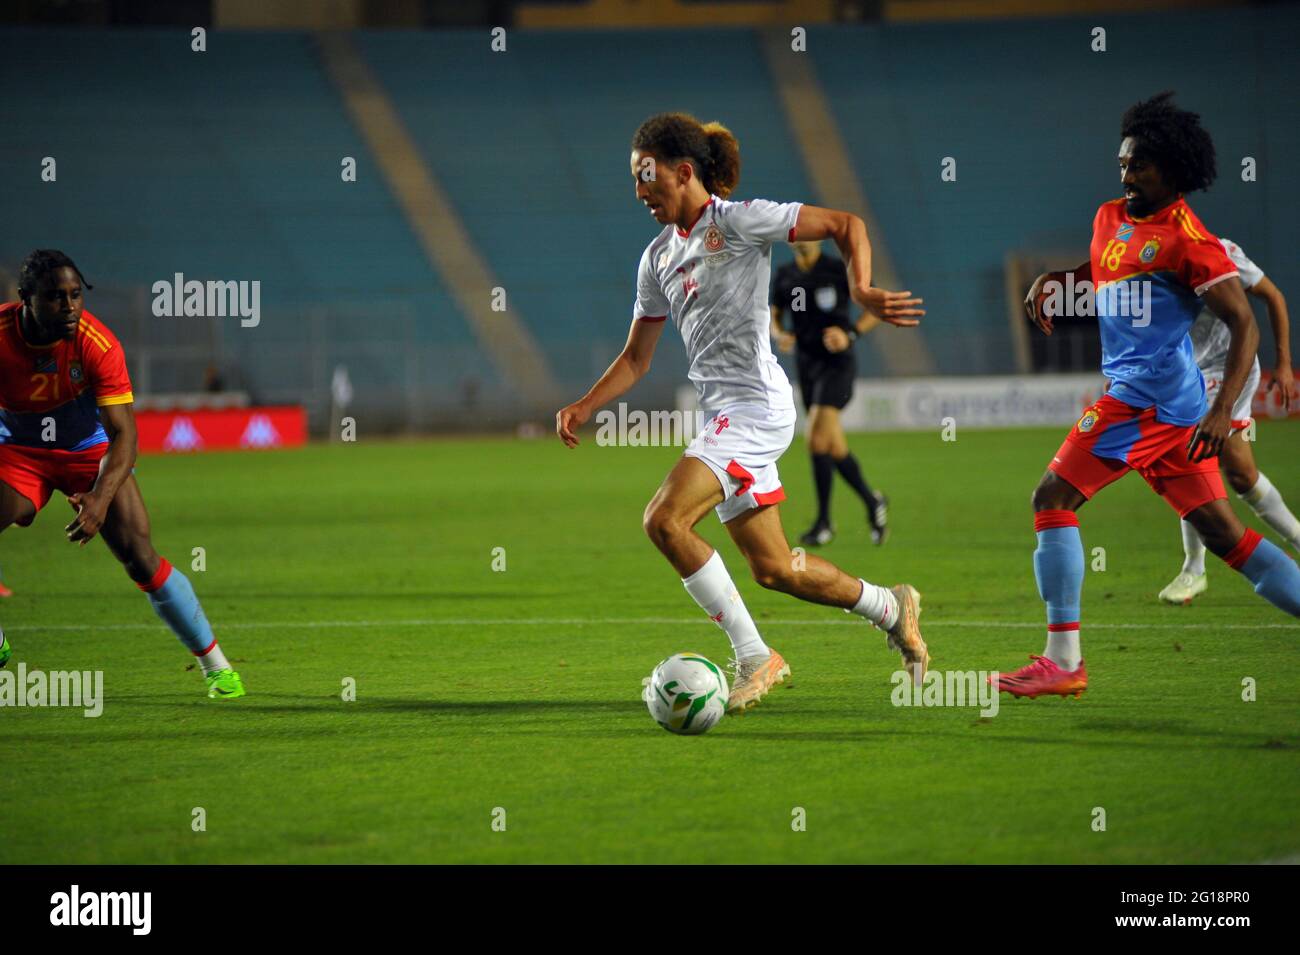 Rades, Tunis, Tunisia. 5th June, 2021. Hannibal Mejbri (14) Tunisian player who plays in England and selected for the first time in action during FIFA Day friendly match Tunisia-DR Congo at Rades stadium Photo: Chokri Mahjoub. Credit: Chokri Mahjoub/ZUMA Wire/Alamy Live News Stock Photo